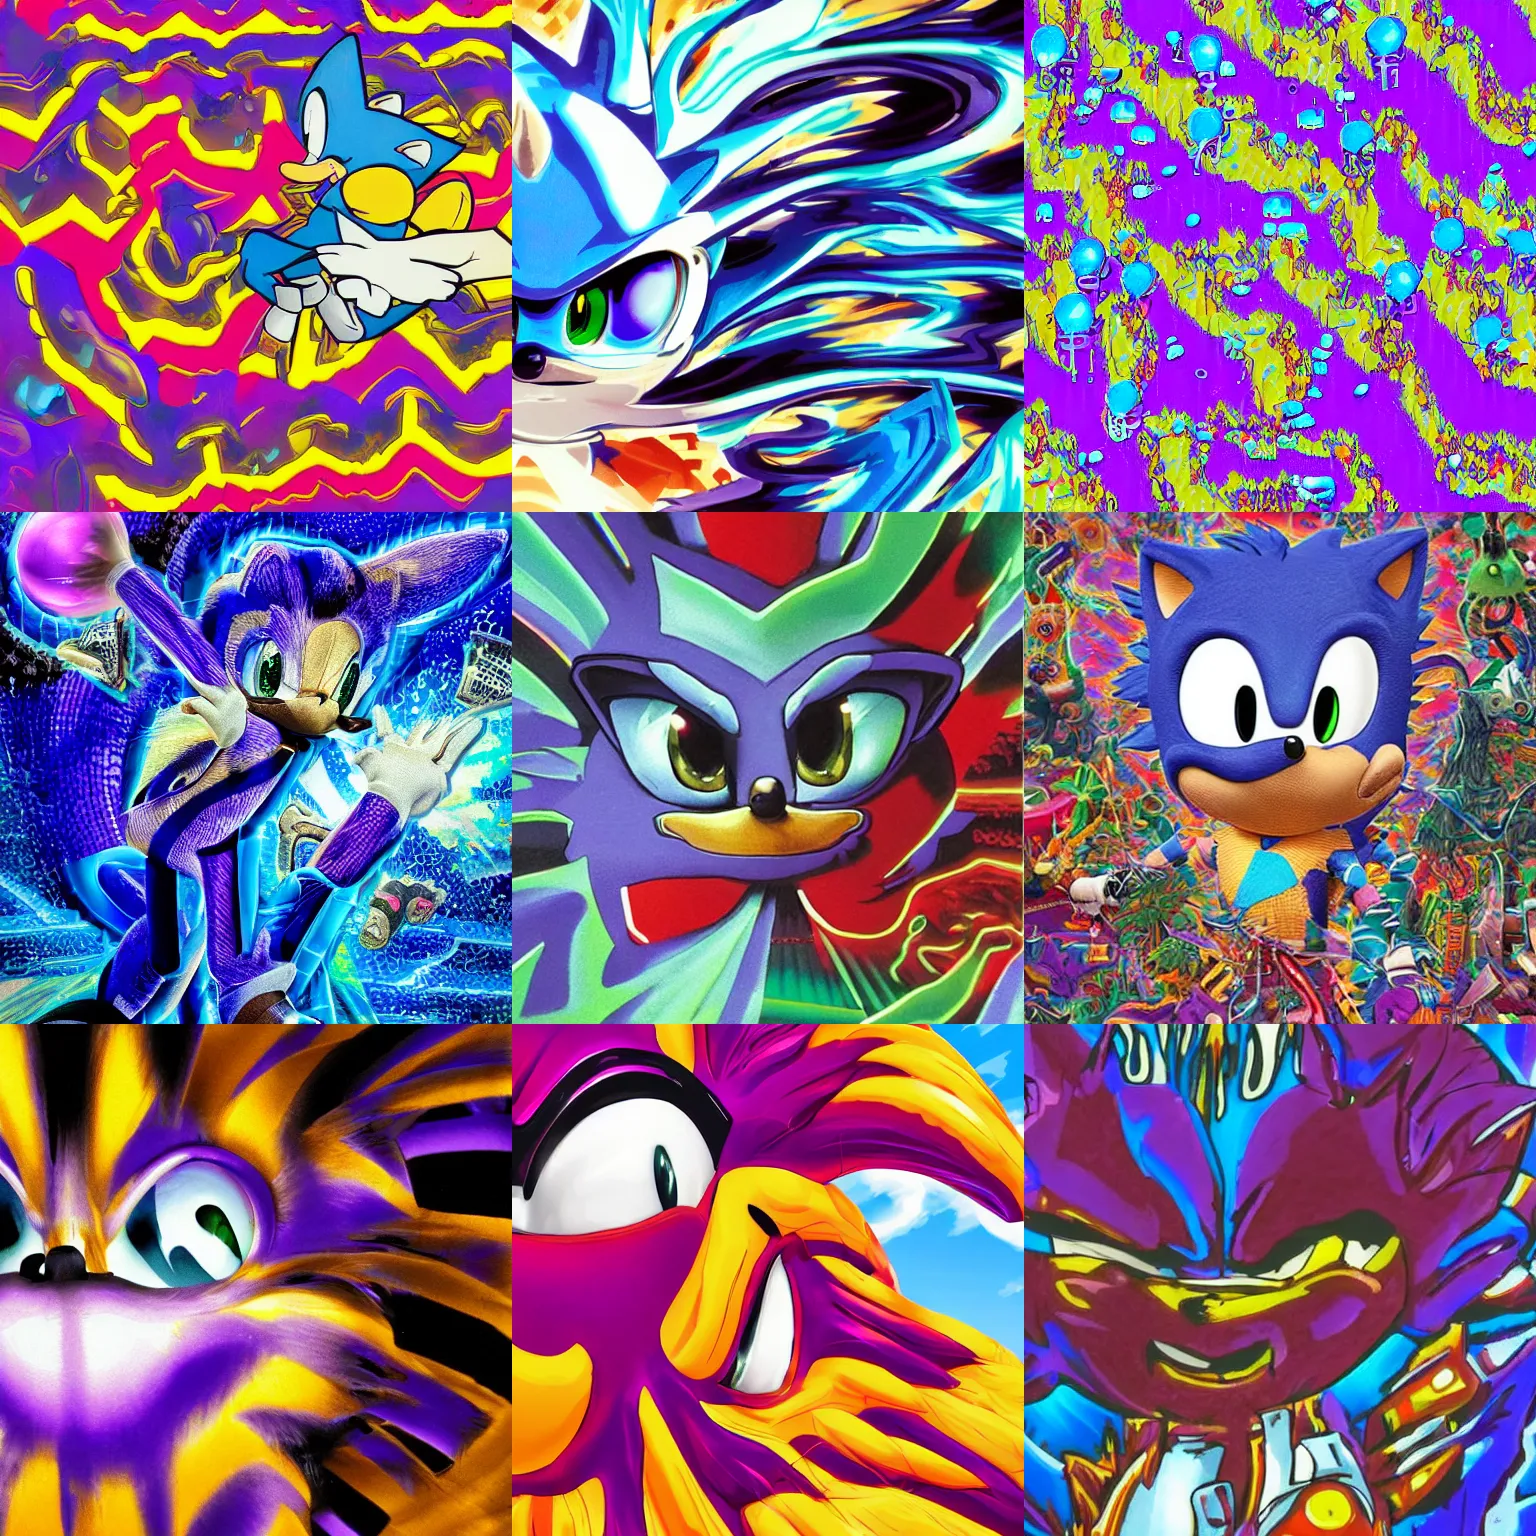 Prompt: close up portrait sonic the hedgehog in a surreal, sharp, detailed professional, high quality airbrush vaporwave art MGMT album cover of a liquid dissolving LSD DMT sonic the hedgehog speeding through pixel lands, purple checkerboard background, 1990s 1992 Sega Genesis video game album cover sonic